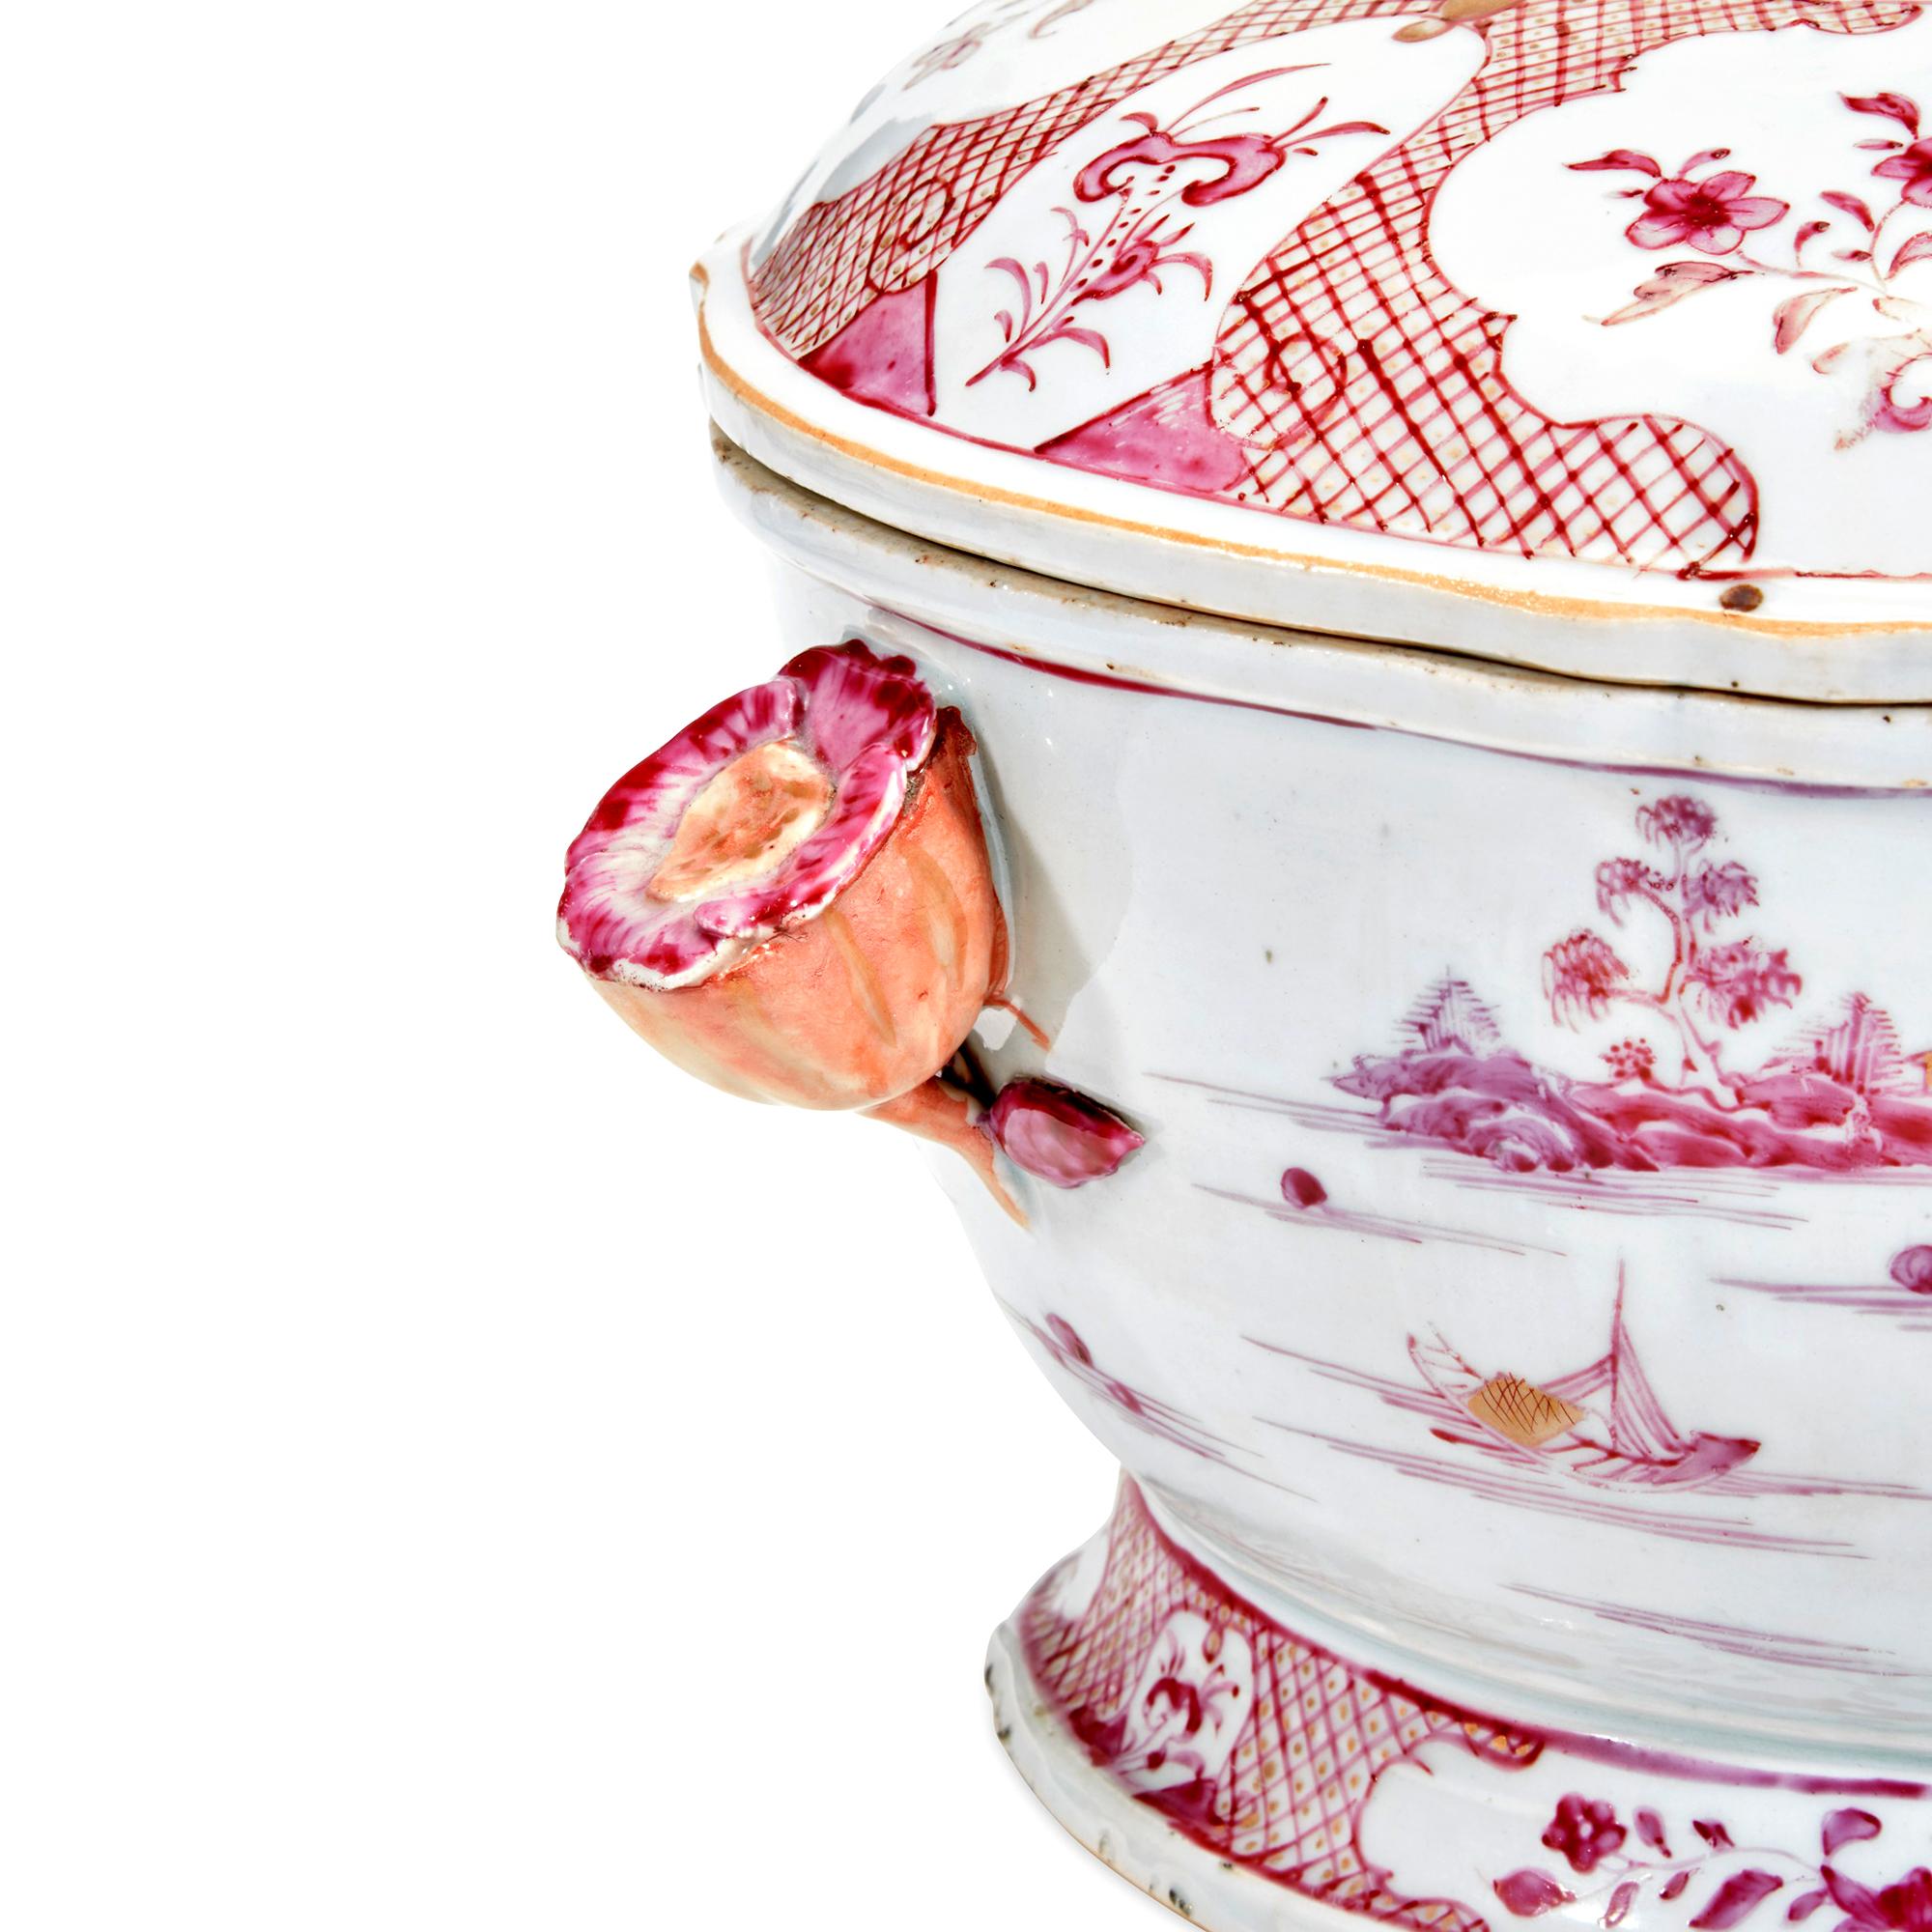 The Chinese Export porcelain puce colored oval-shaped soup tureen is decorated with pavilions by a river, the wide diaper borders punctuated by shaped reserves of lotus and lingzhi sprays, an unusual large Flower head finial to the domed cover. The